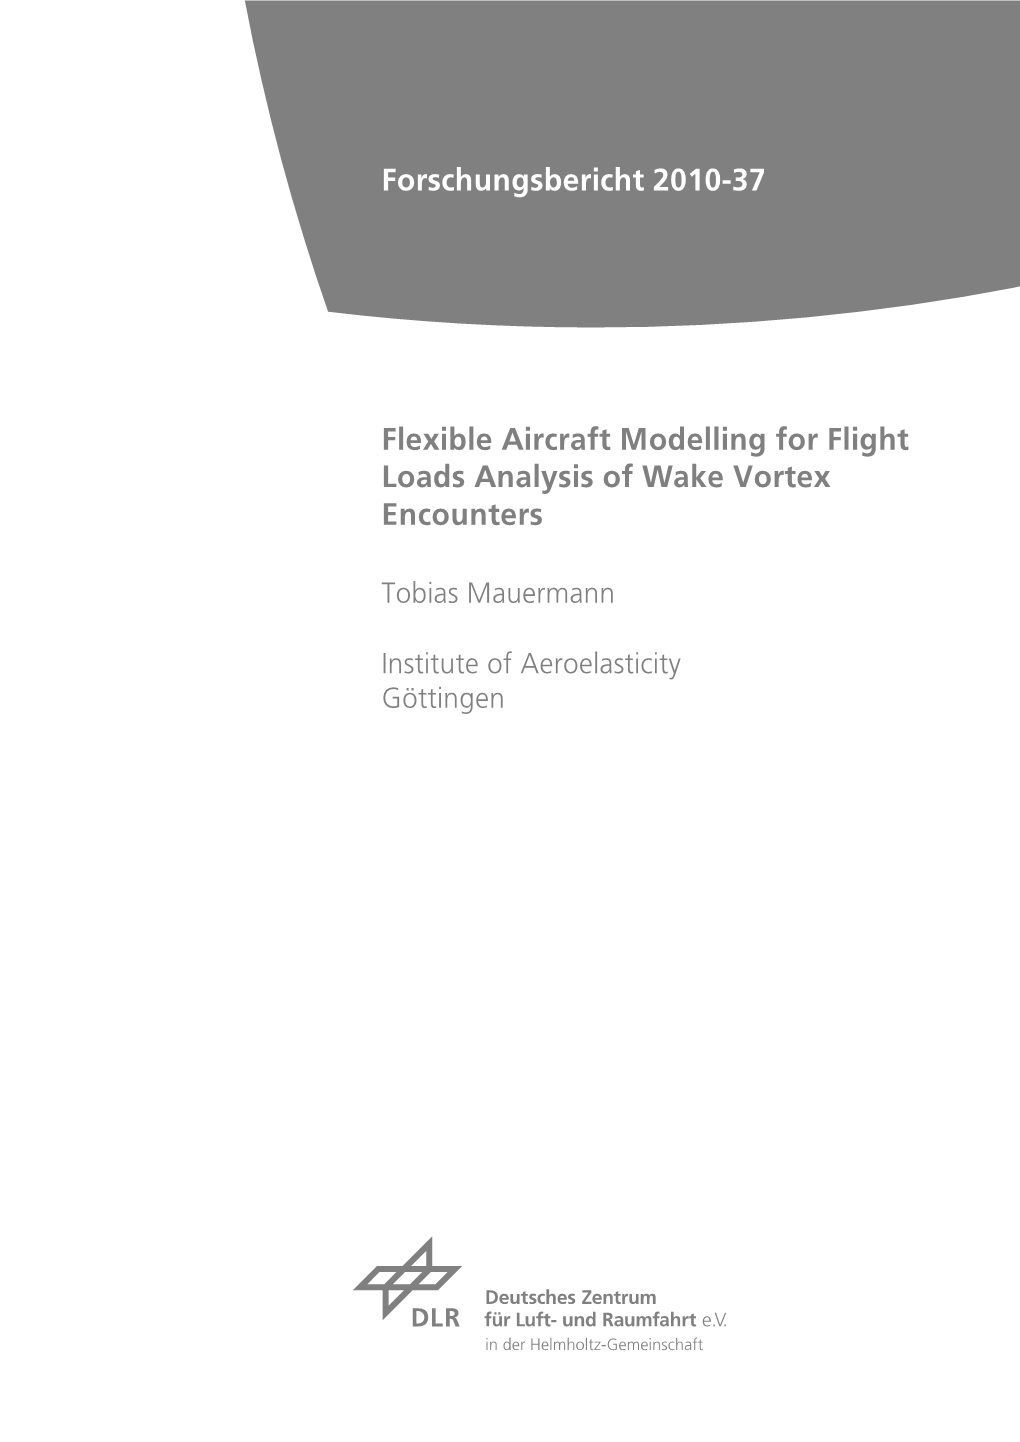 Flexible Aircraft Modelling for Flight Loads Analysis of Wake Vortex Encounters